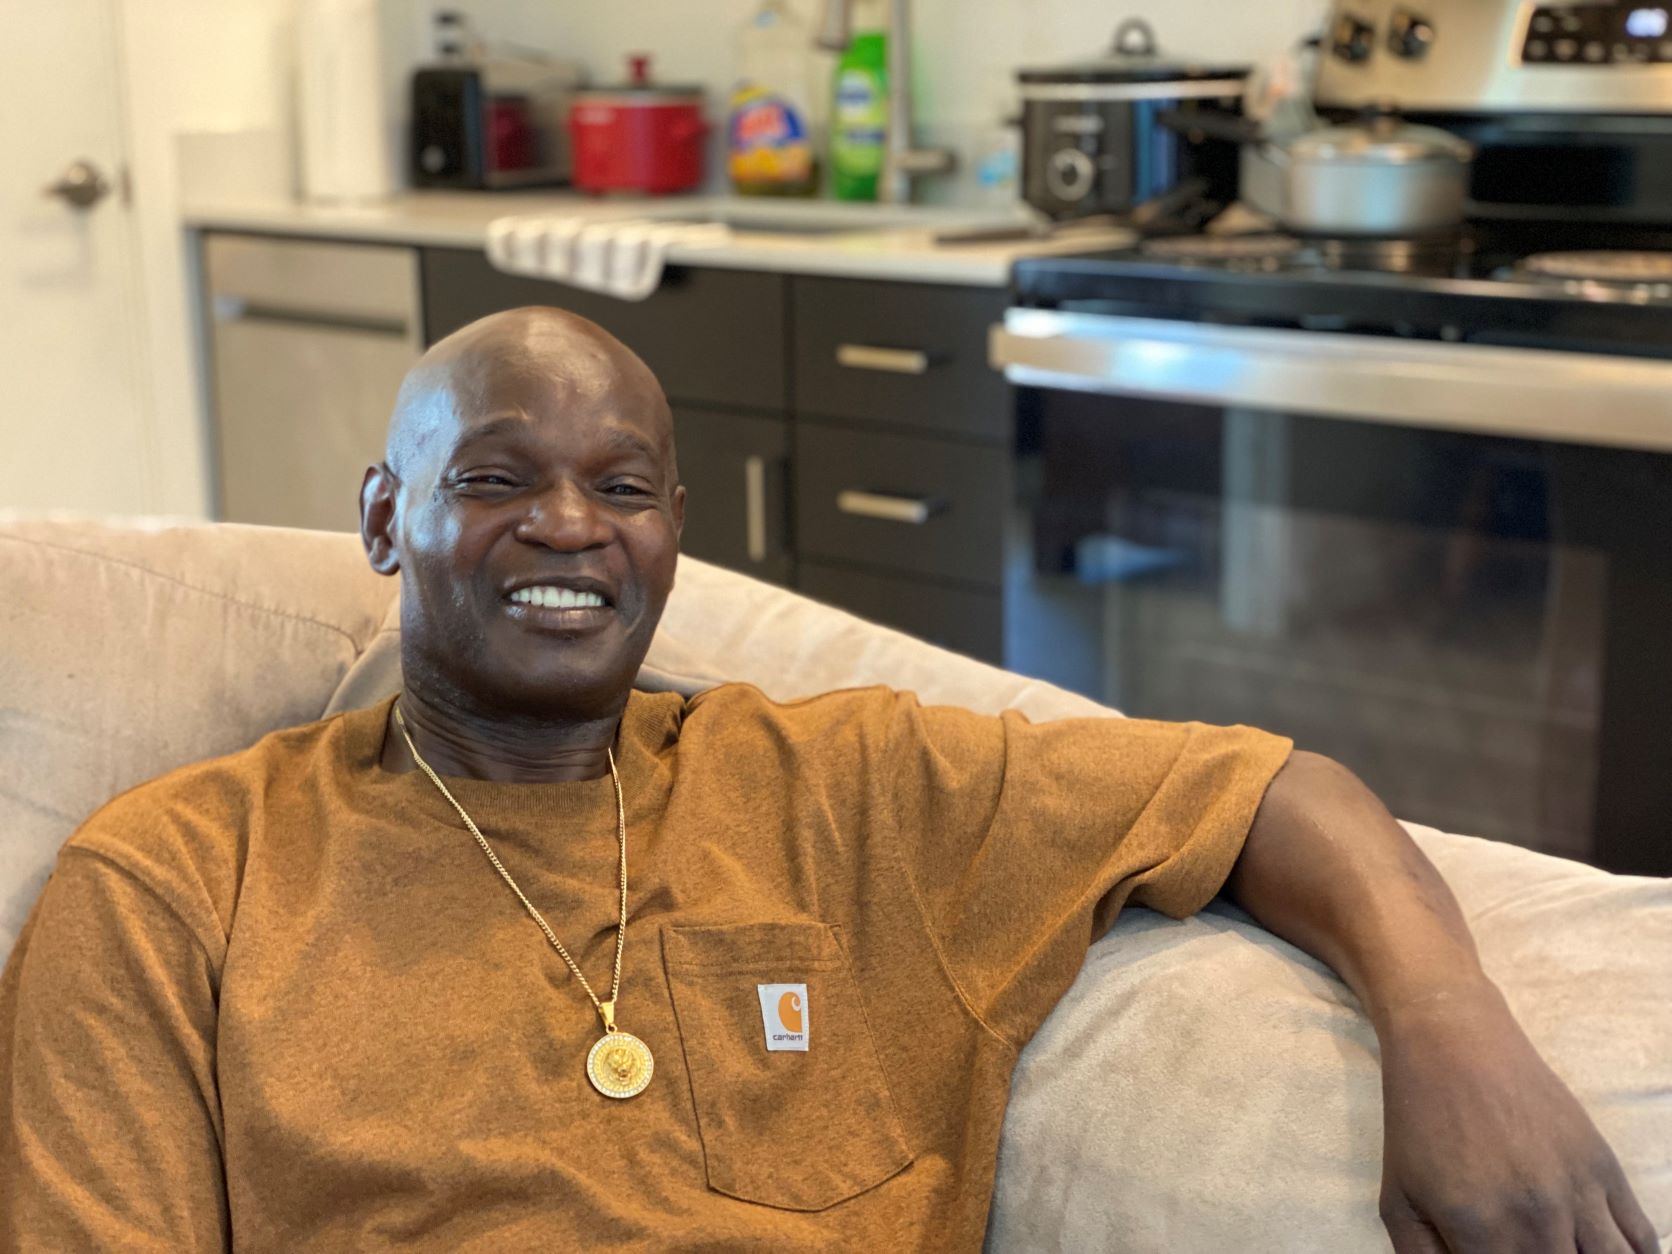 Dale, a Black man with a shaved head wearing a tan t-shirt and a necklace with a round medallion, sits on his sofa smiling.